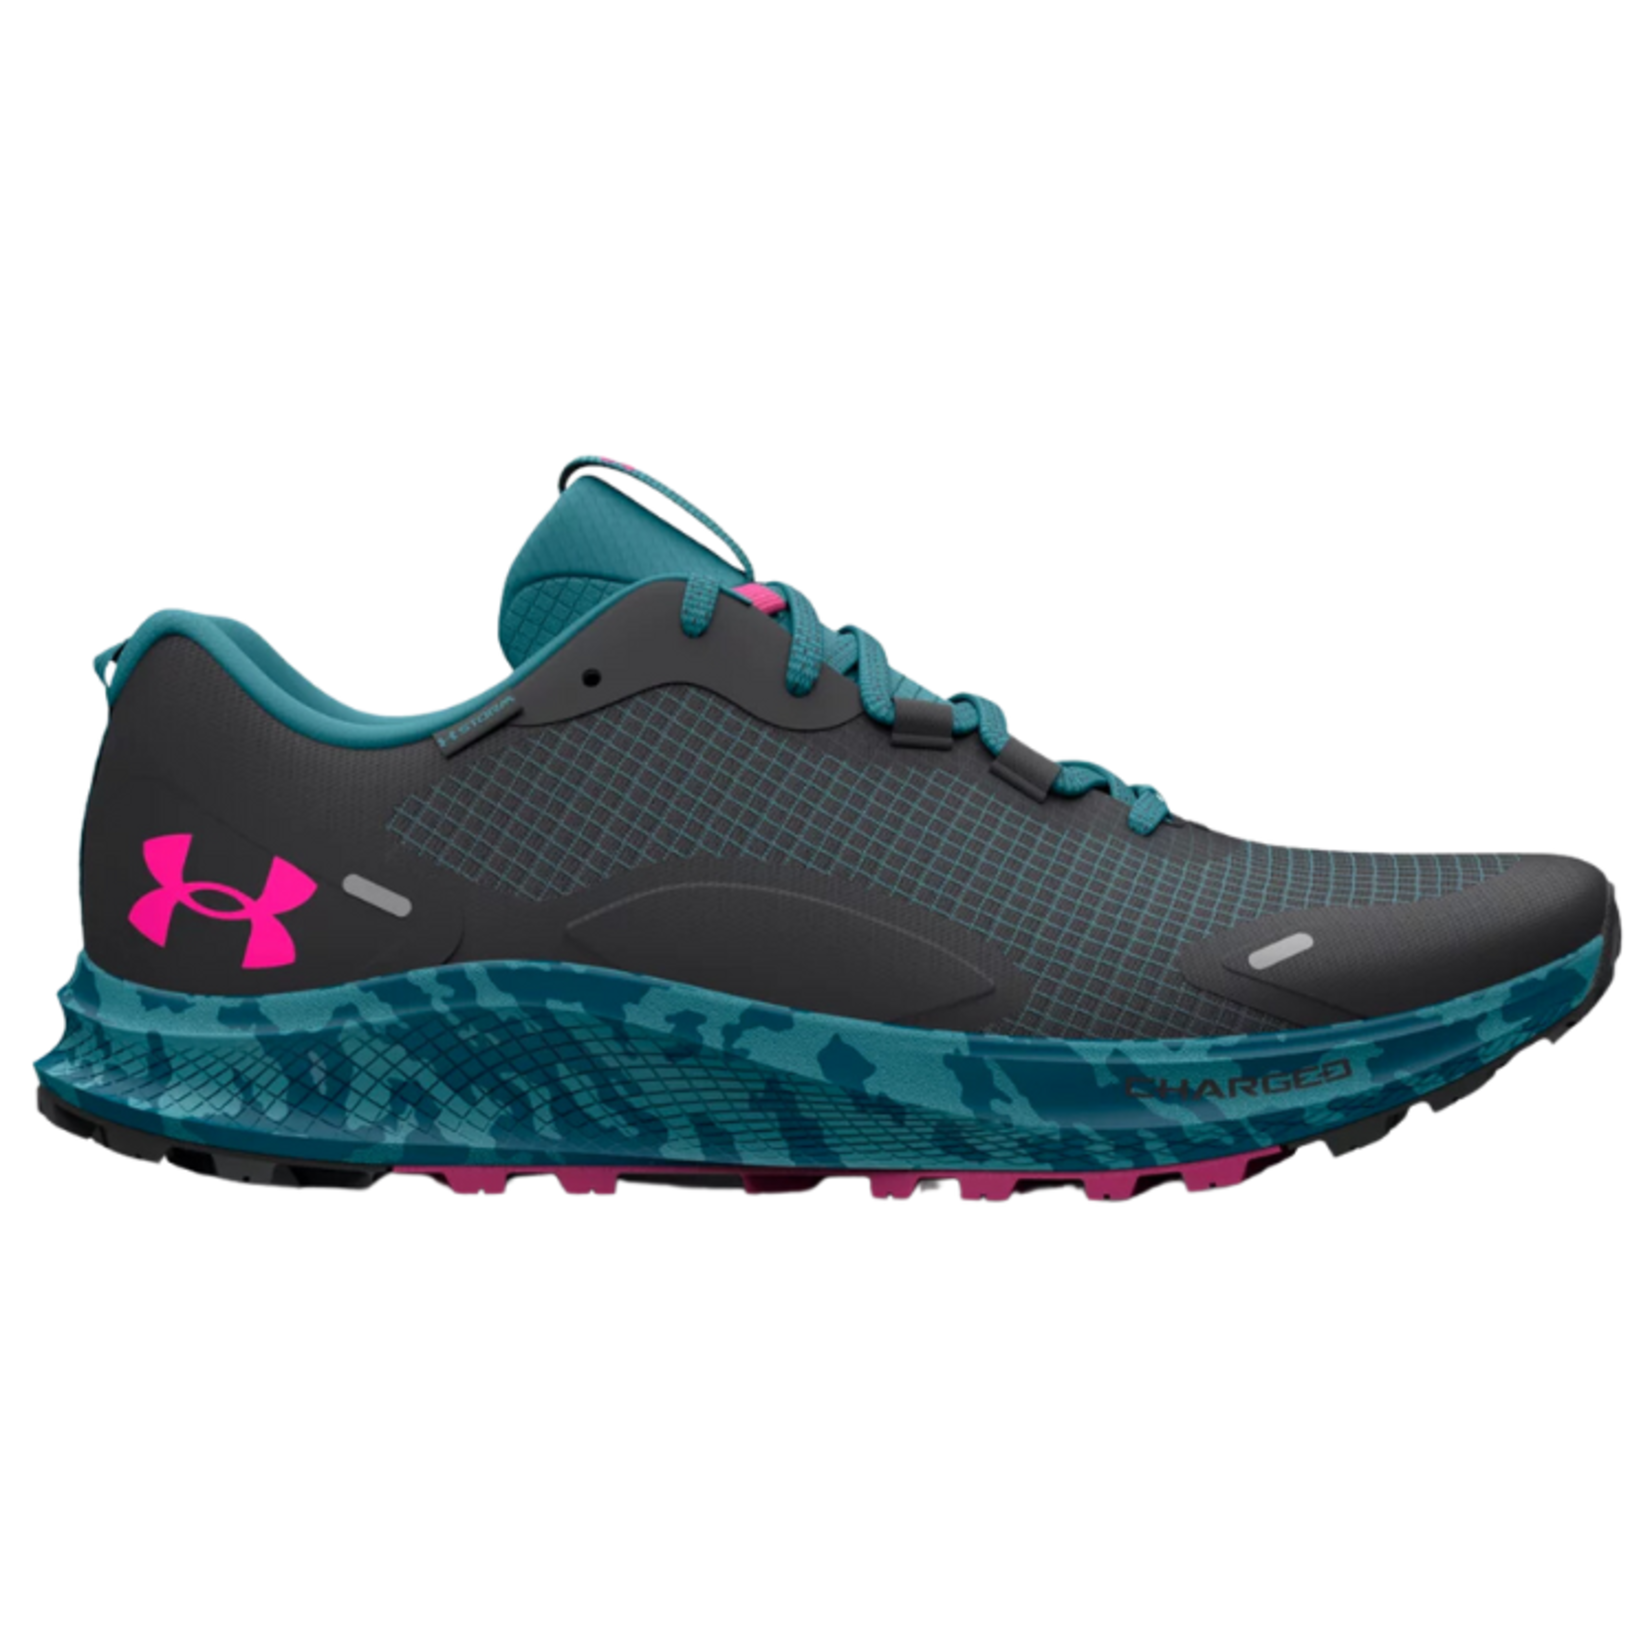 Under Armour Under Armour Trail Running Shoes, Charged Bandit Trail 2 Storm, Ladies